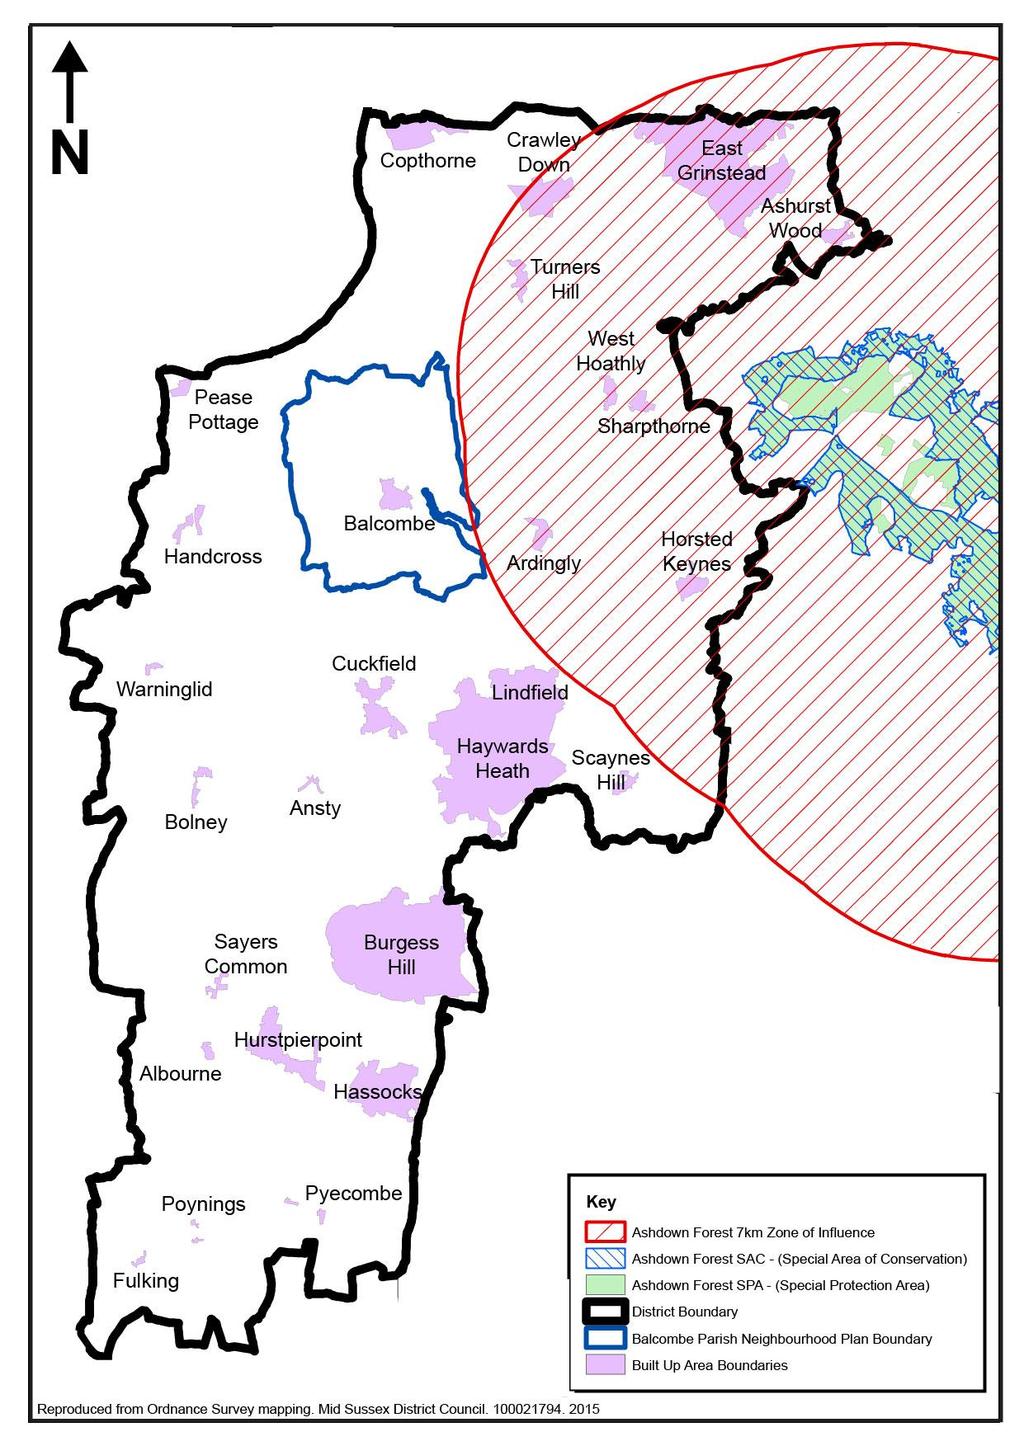 Appendix 1: The Balcombe Neighbourhood Plan Area in relation to the